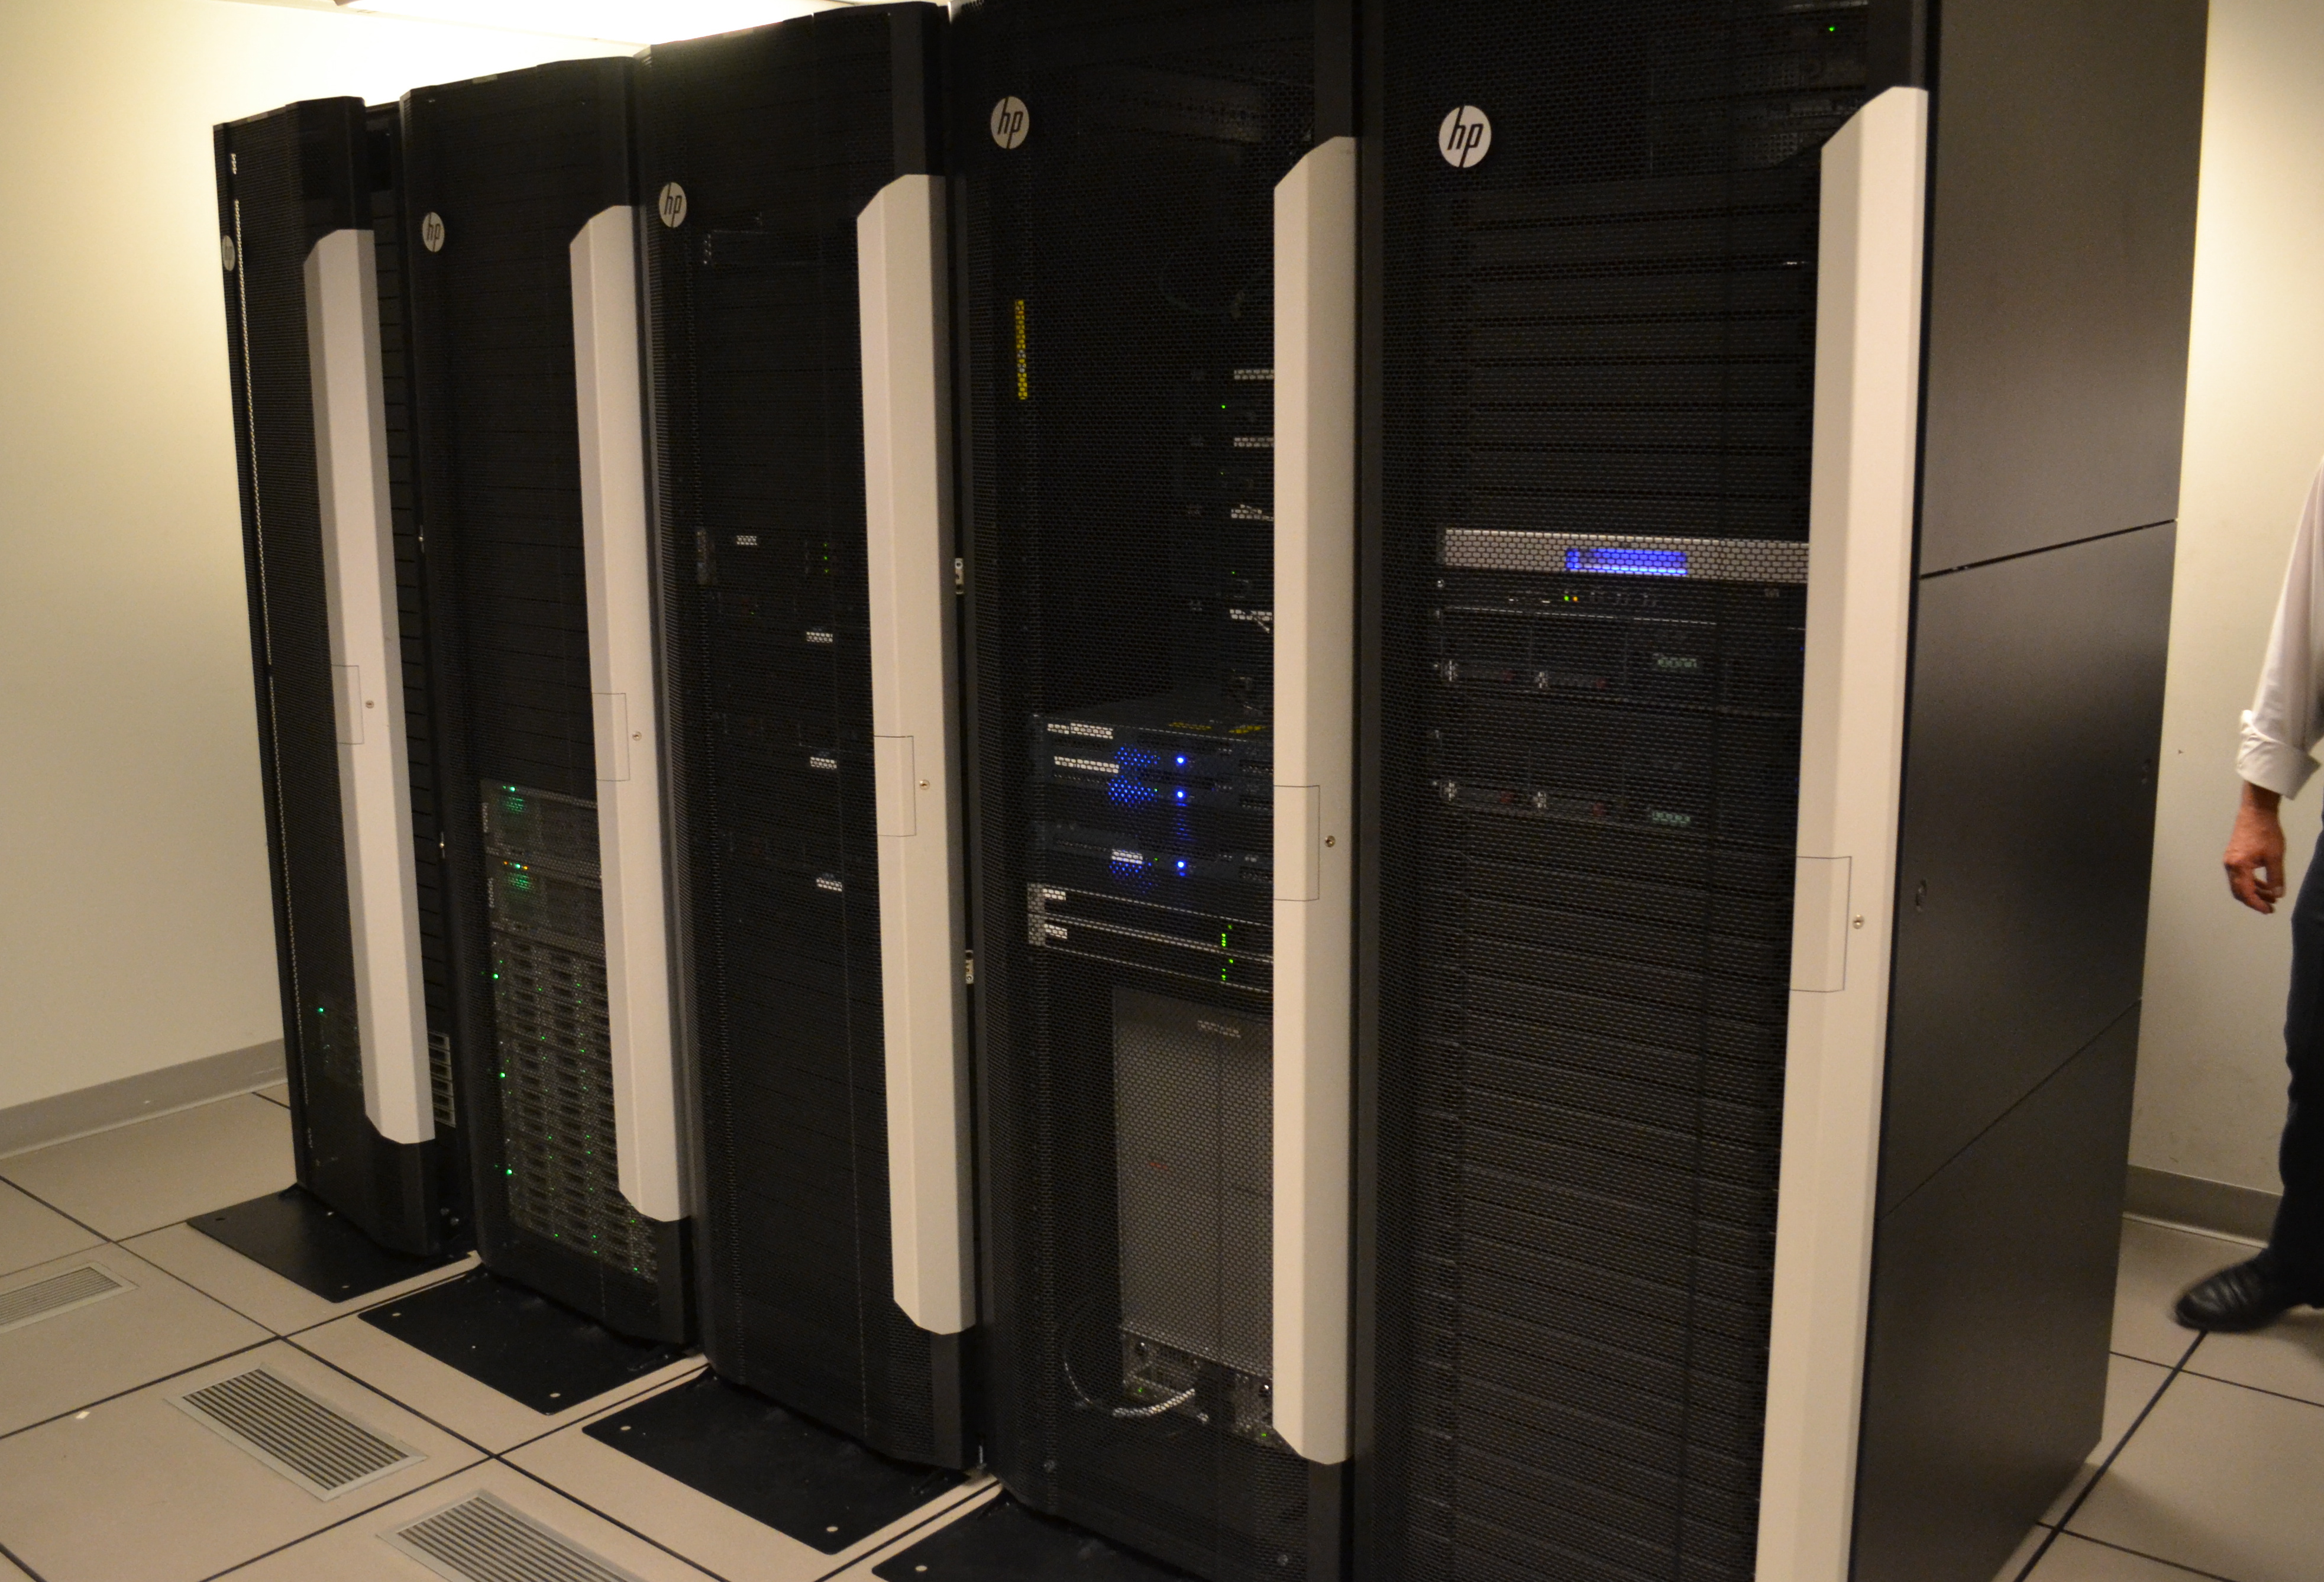 The New Payment Technology data center is capable of processing 50,000 transactions in less than a minute